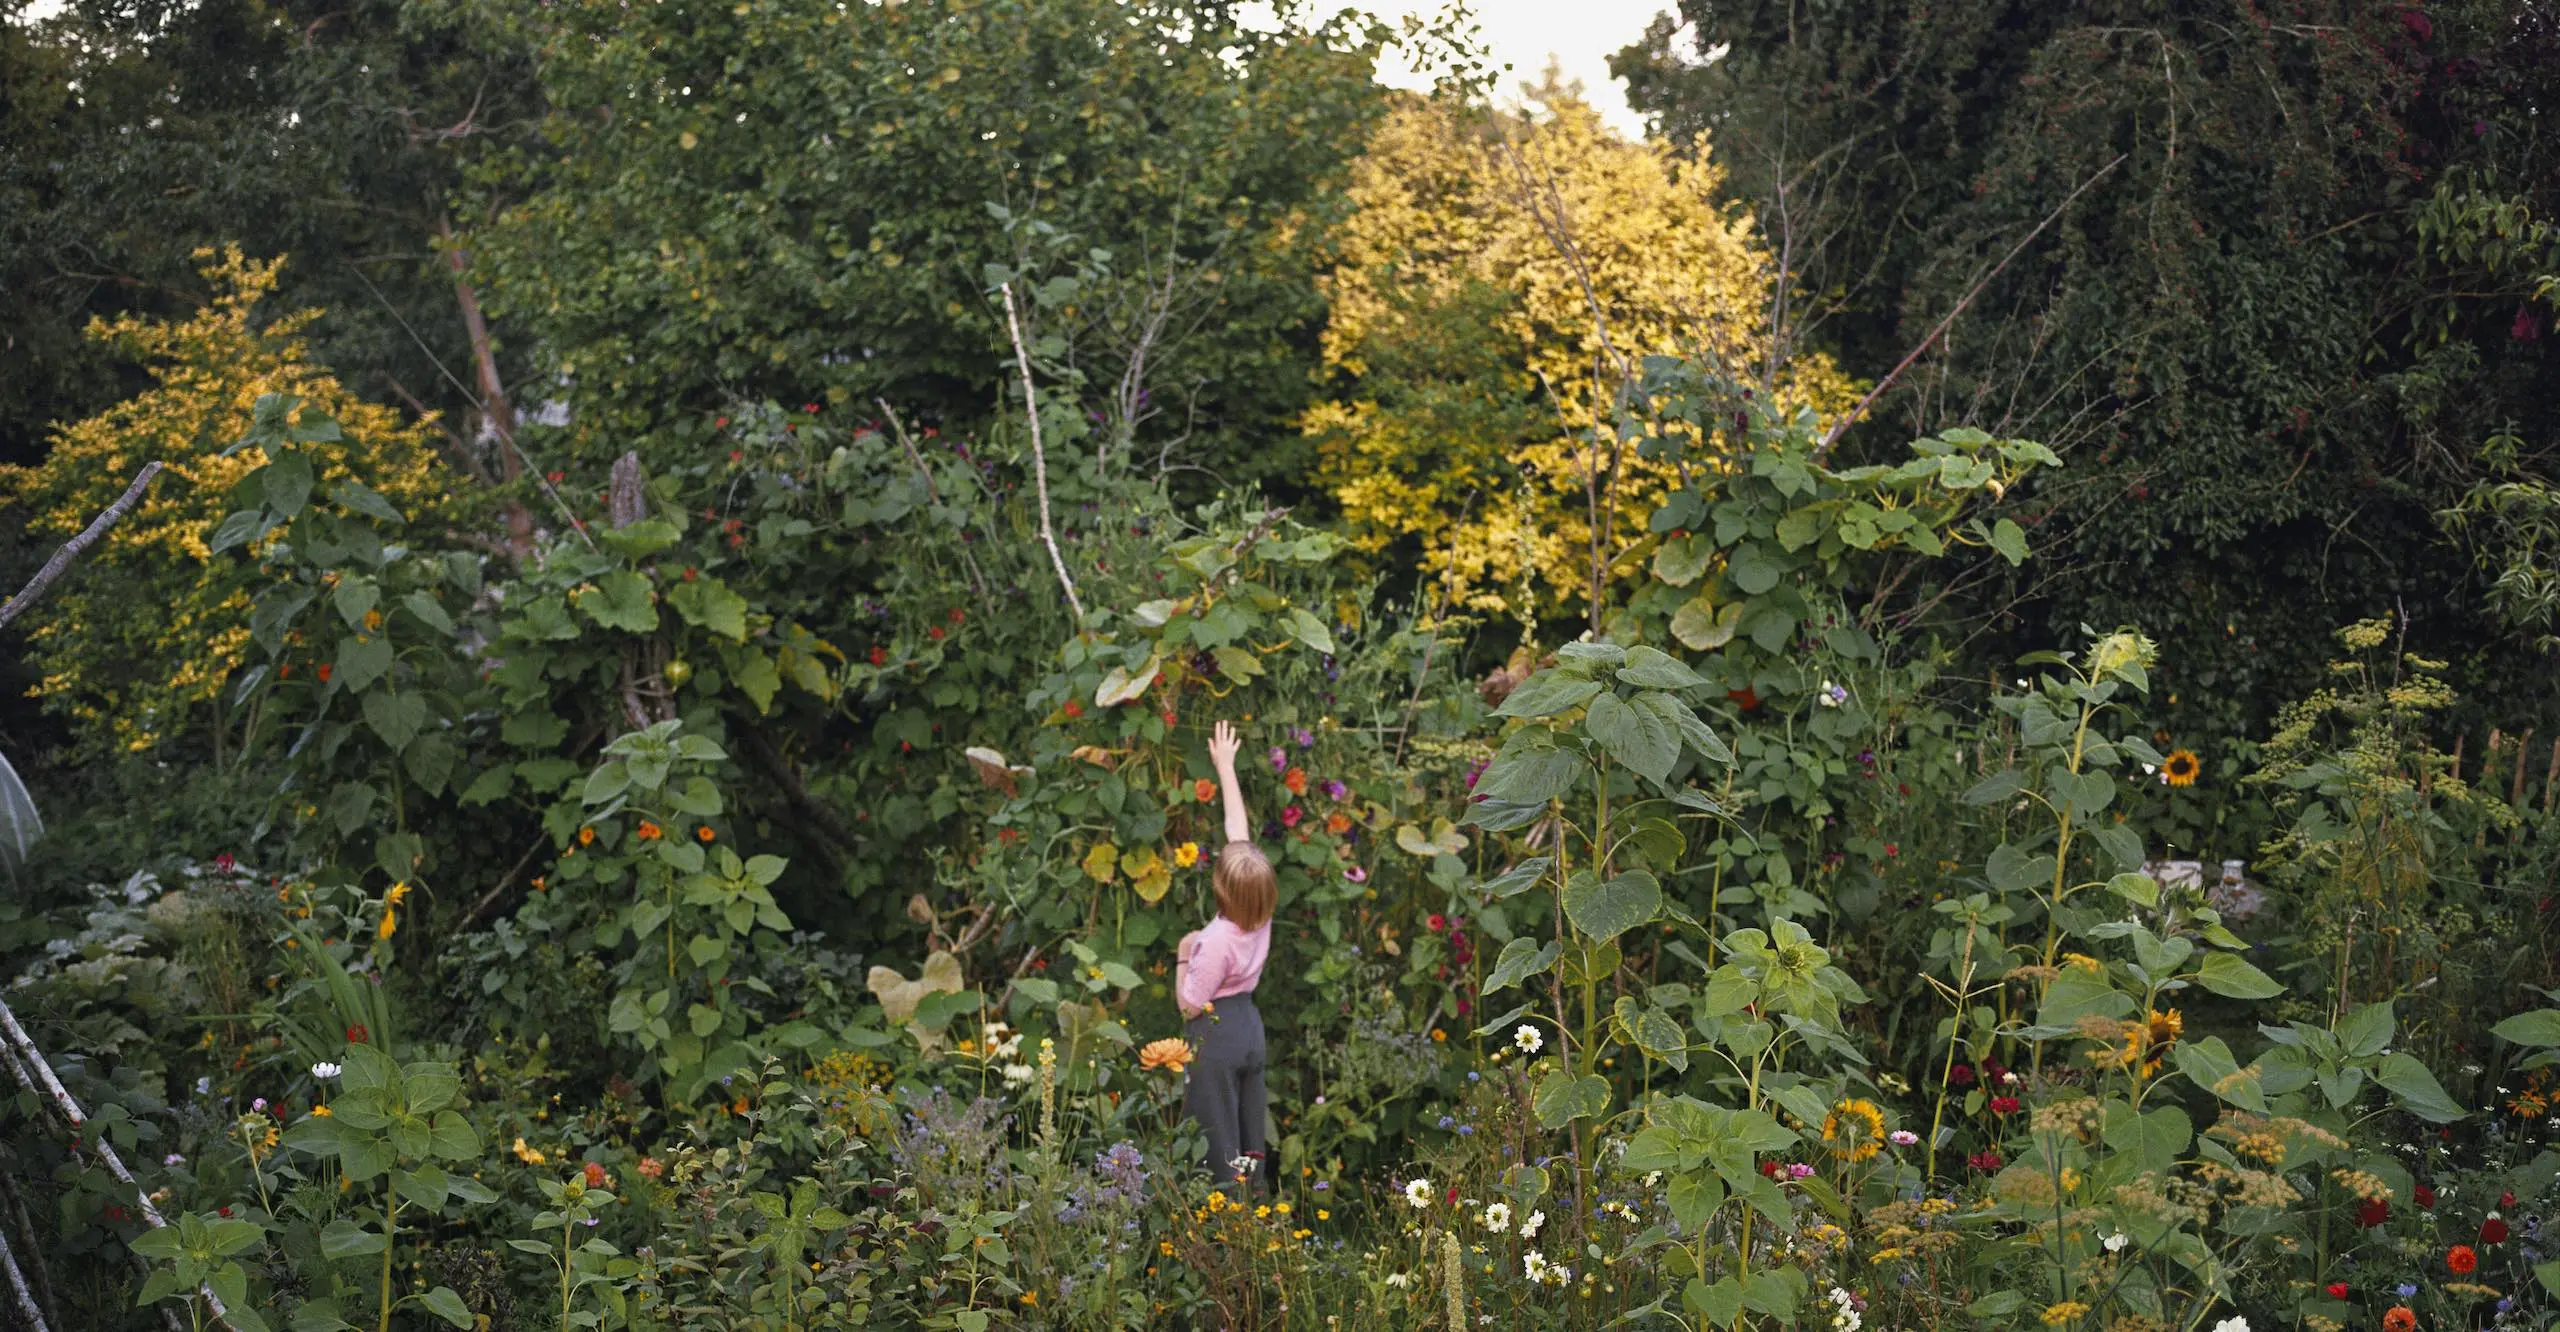 Colour photograph of a person with an outstretched arm, reaching up to grab a leaf in the middle of a garden